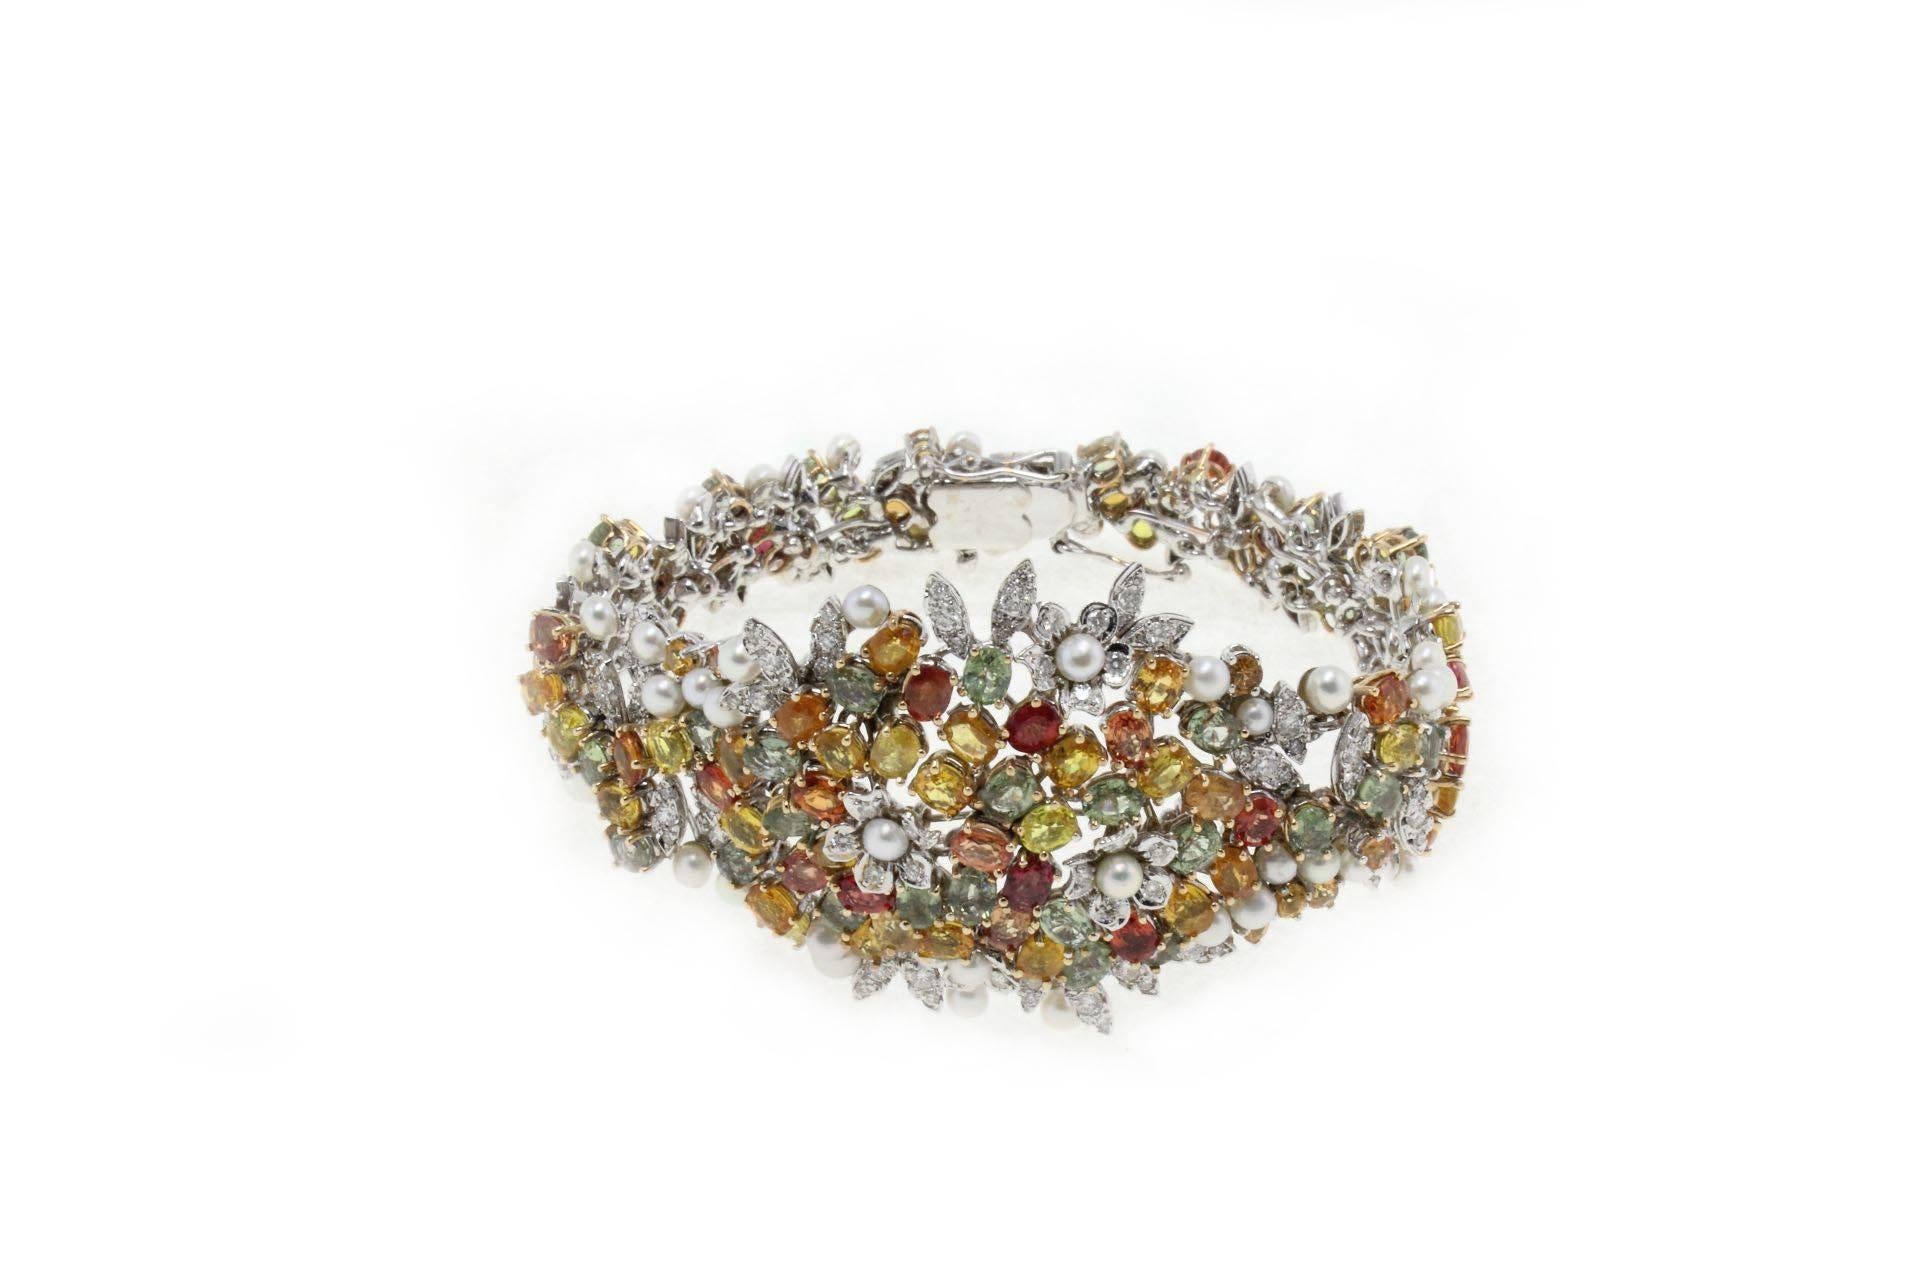 Mounted with 14Kt white gold and details of gold, there is a bouquet of  diamonds (2.68Kt) who are naturally matched with the drops of multicolors sapphires, (31.50Kt) and little pearls(1.40gr) to embellished them all. This retro bracelet is the